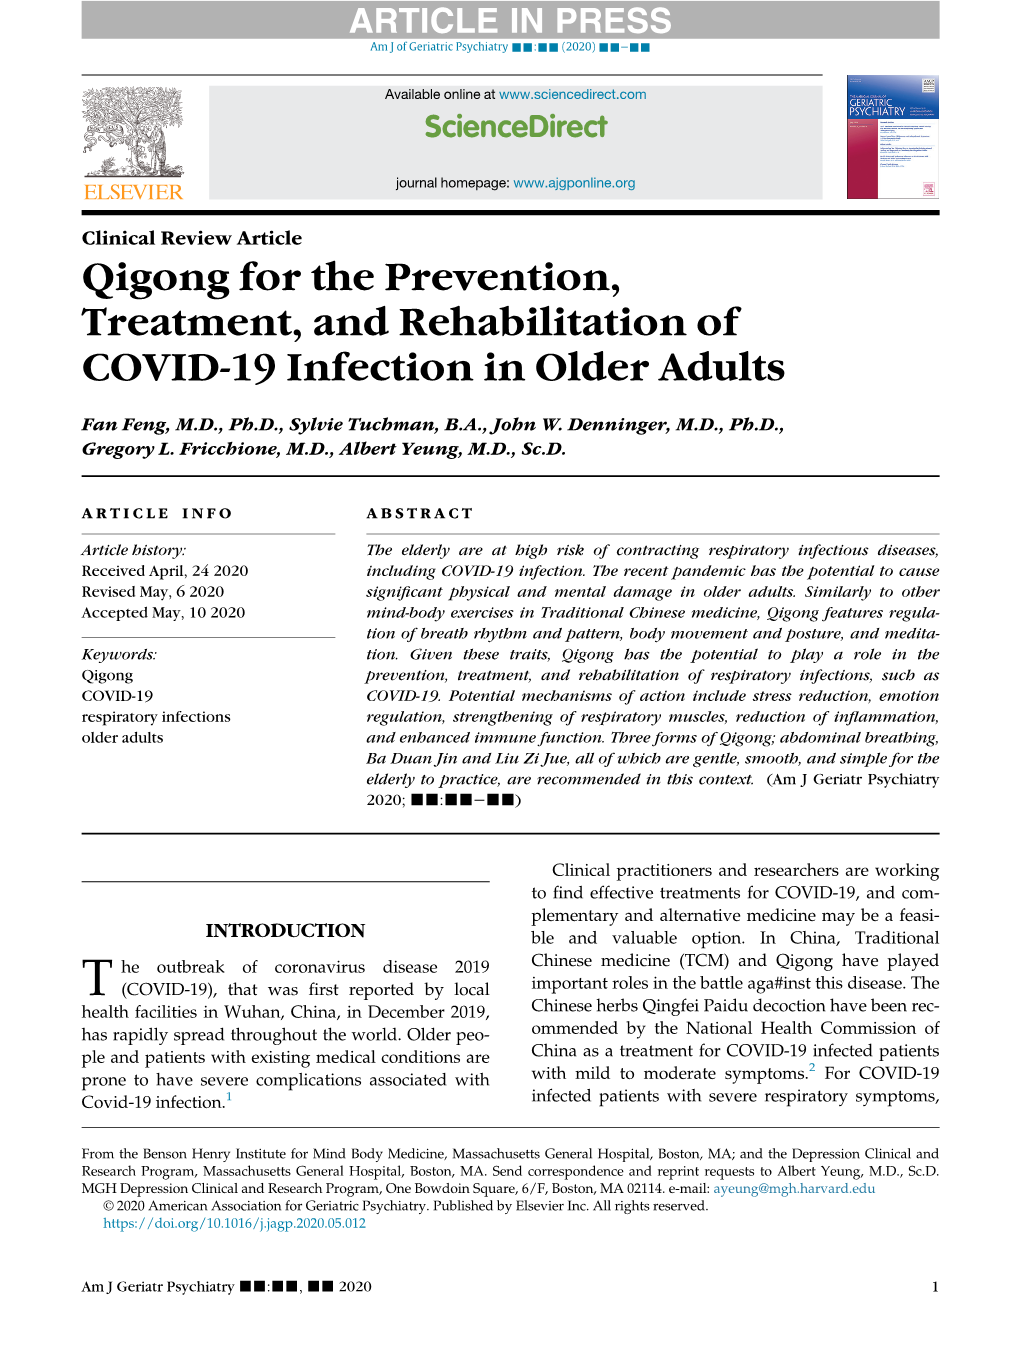 Qigong for the Prevention, Treatment, and Rehabilitation of COVID-19 Infection in Older Adults